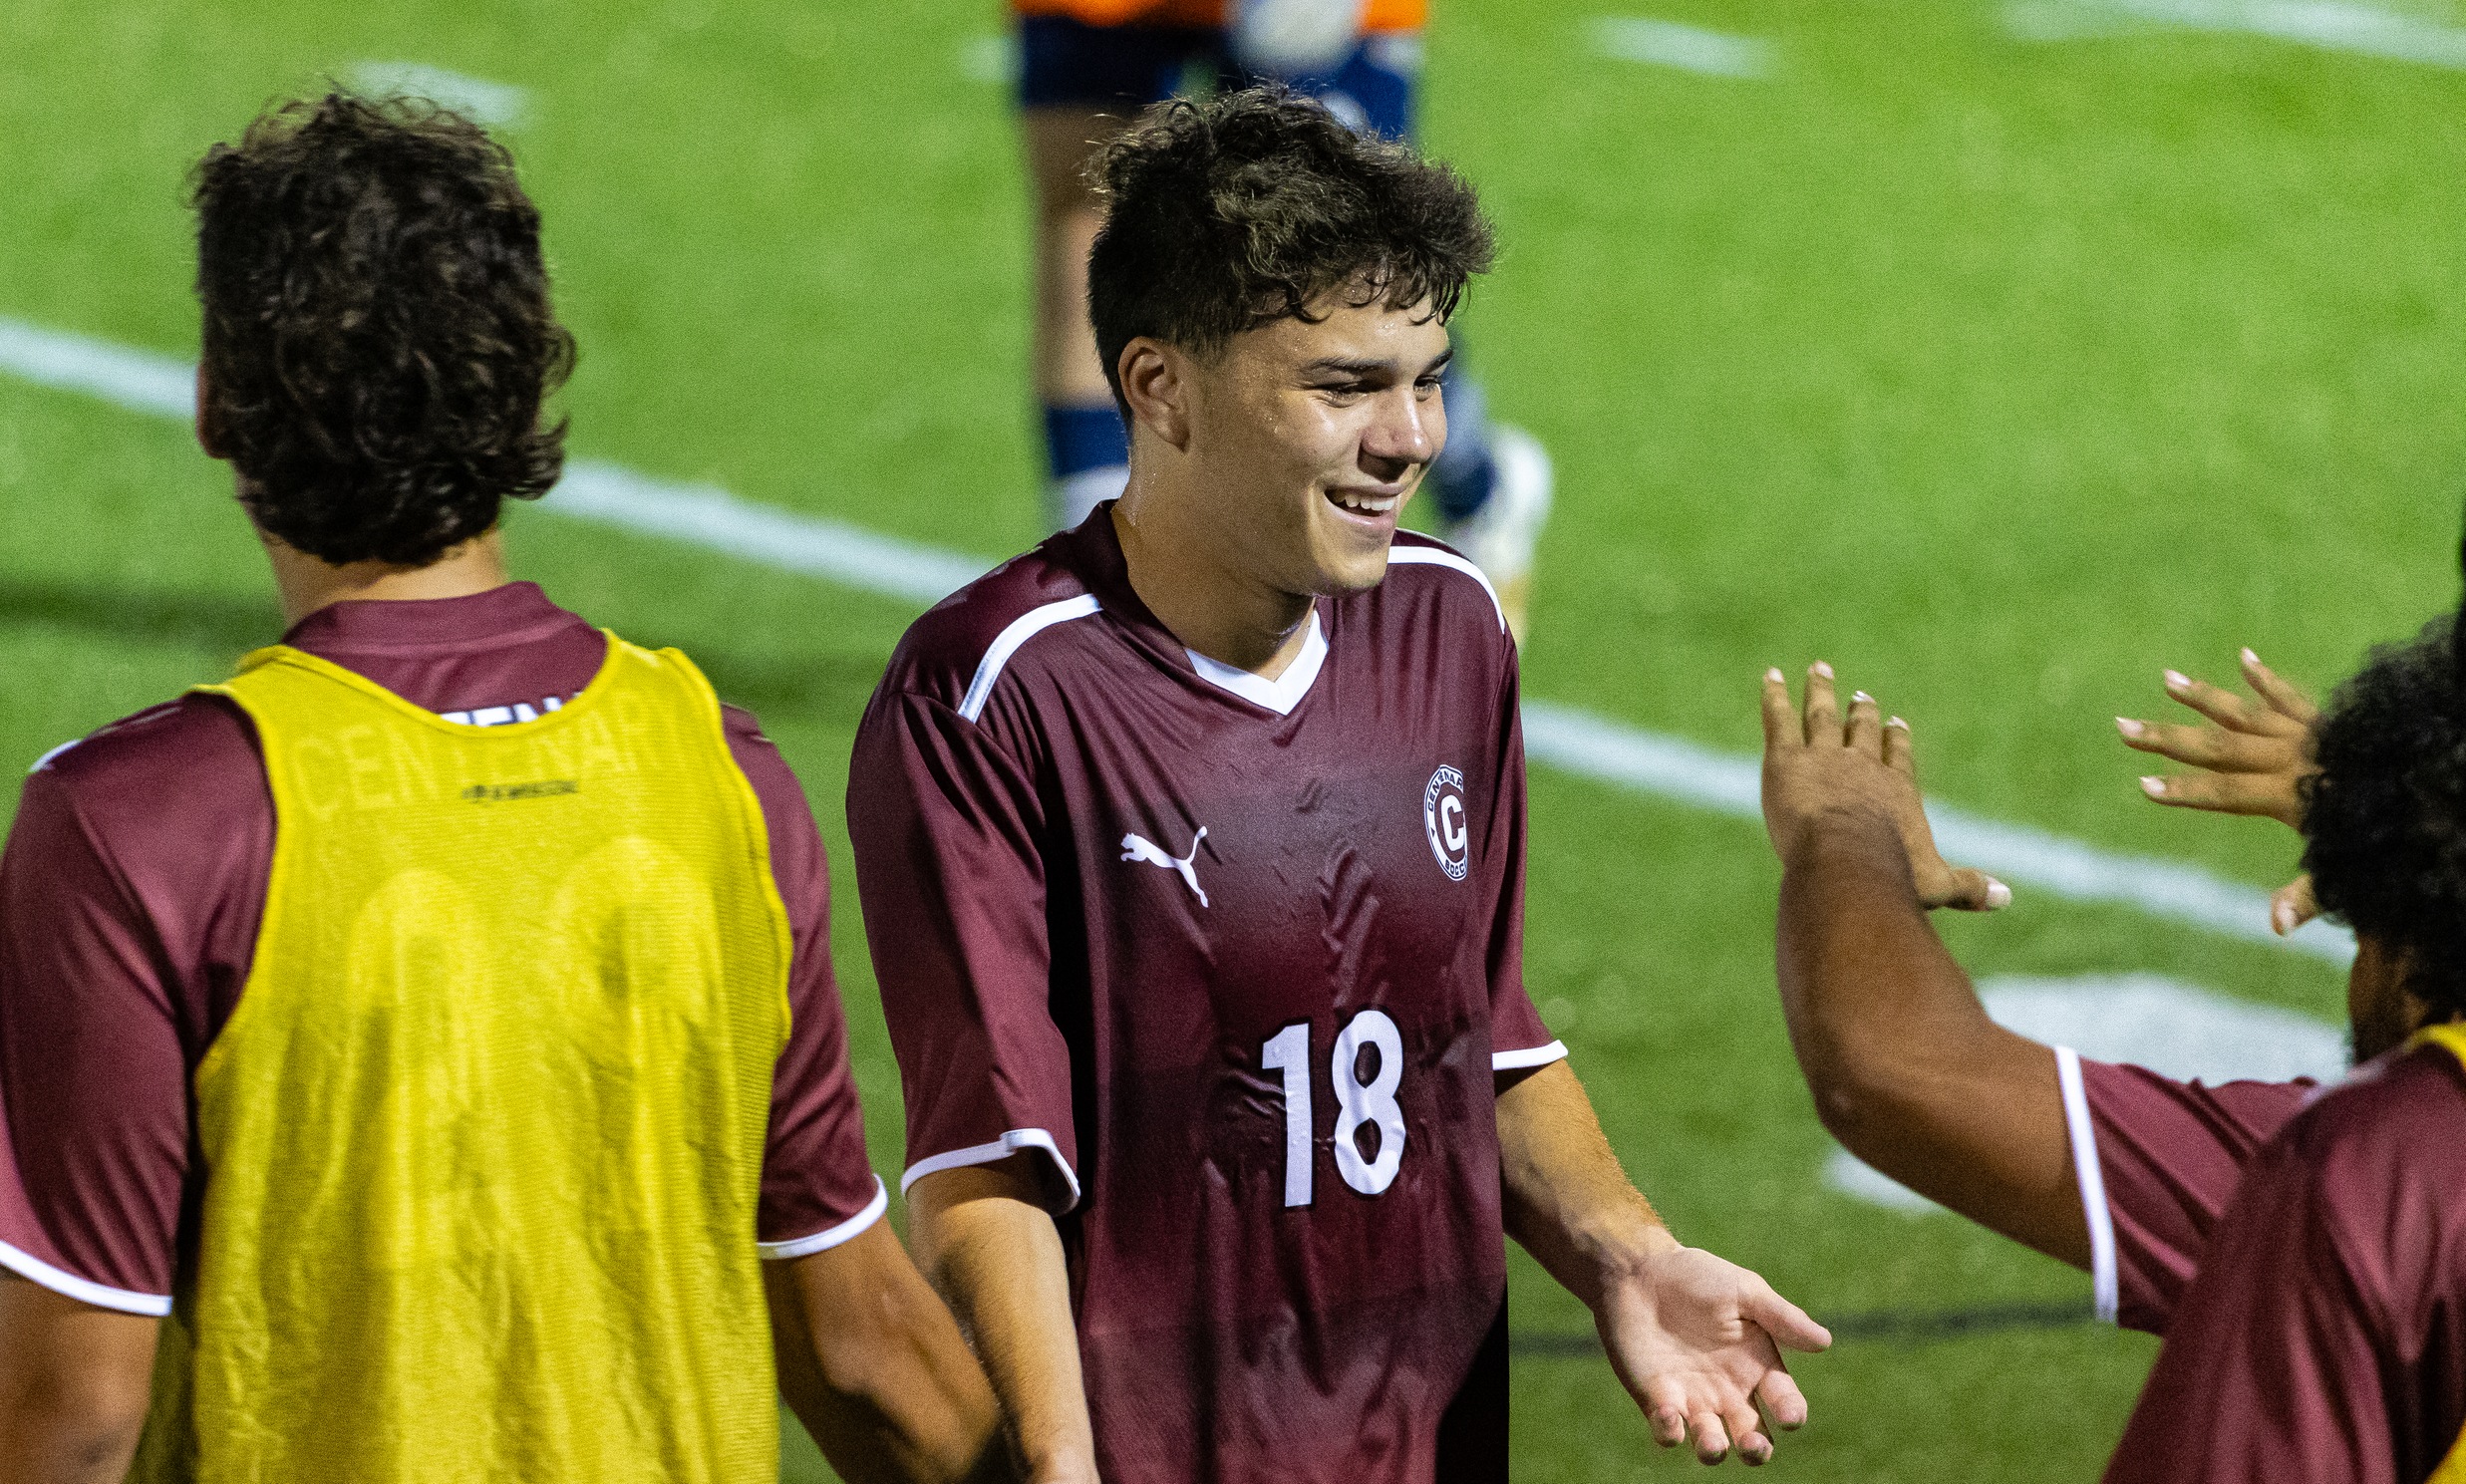 Freshman F Carter Webb scored his first-career goal for the Gents in their 2-0 win on Friday.